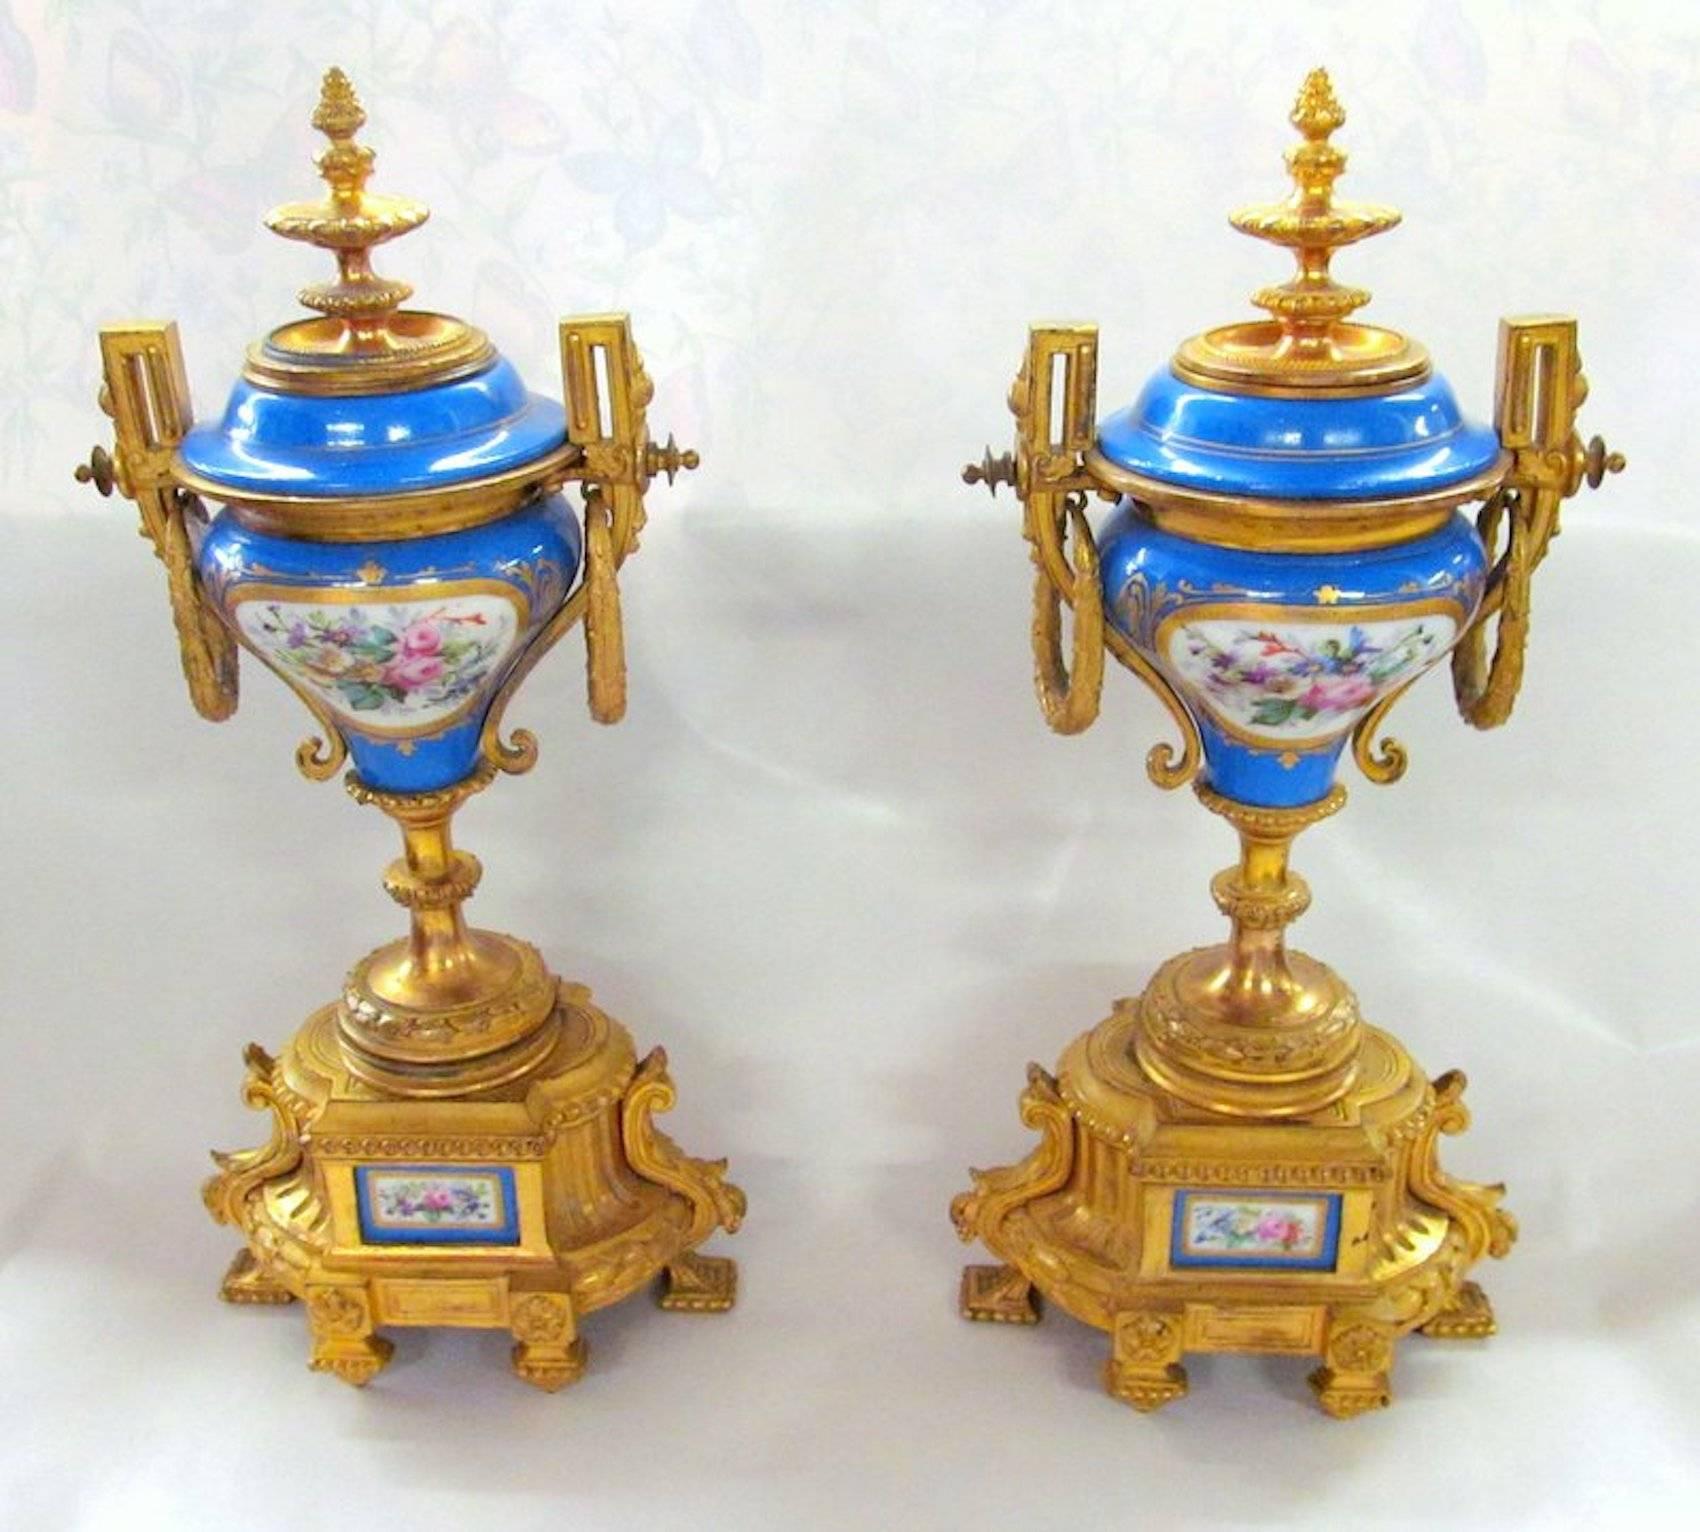 Pair of superb quality antique French Sèvres style porcelain and ormolu-mounted cassolettes or urns

Decorated in hand-painted blue de celeste and floral sprays.

Please note how the ormolu lids turn over to become a pair of candlesticks.